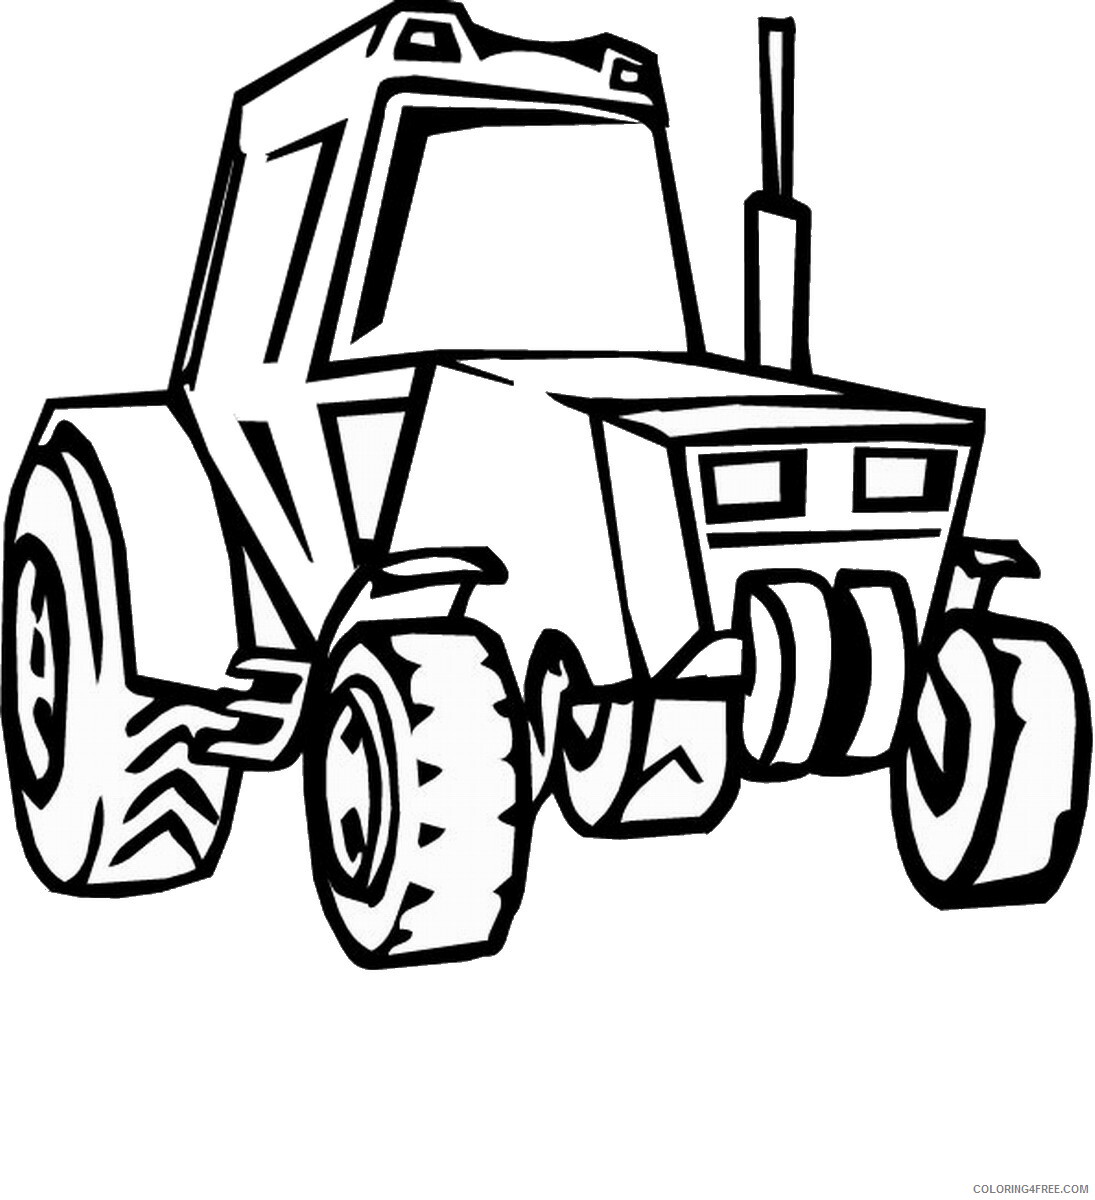 John Deere Tractor Coloring Pages for boys Printable 2020 0490 Coloring4free